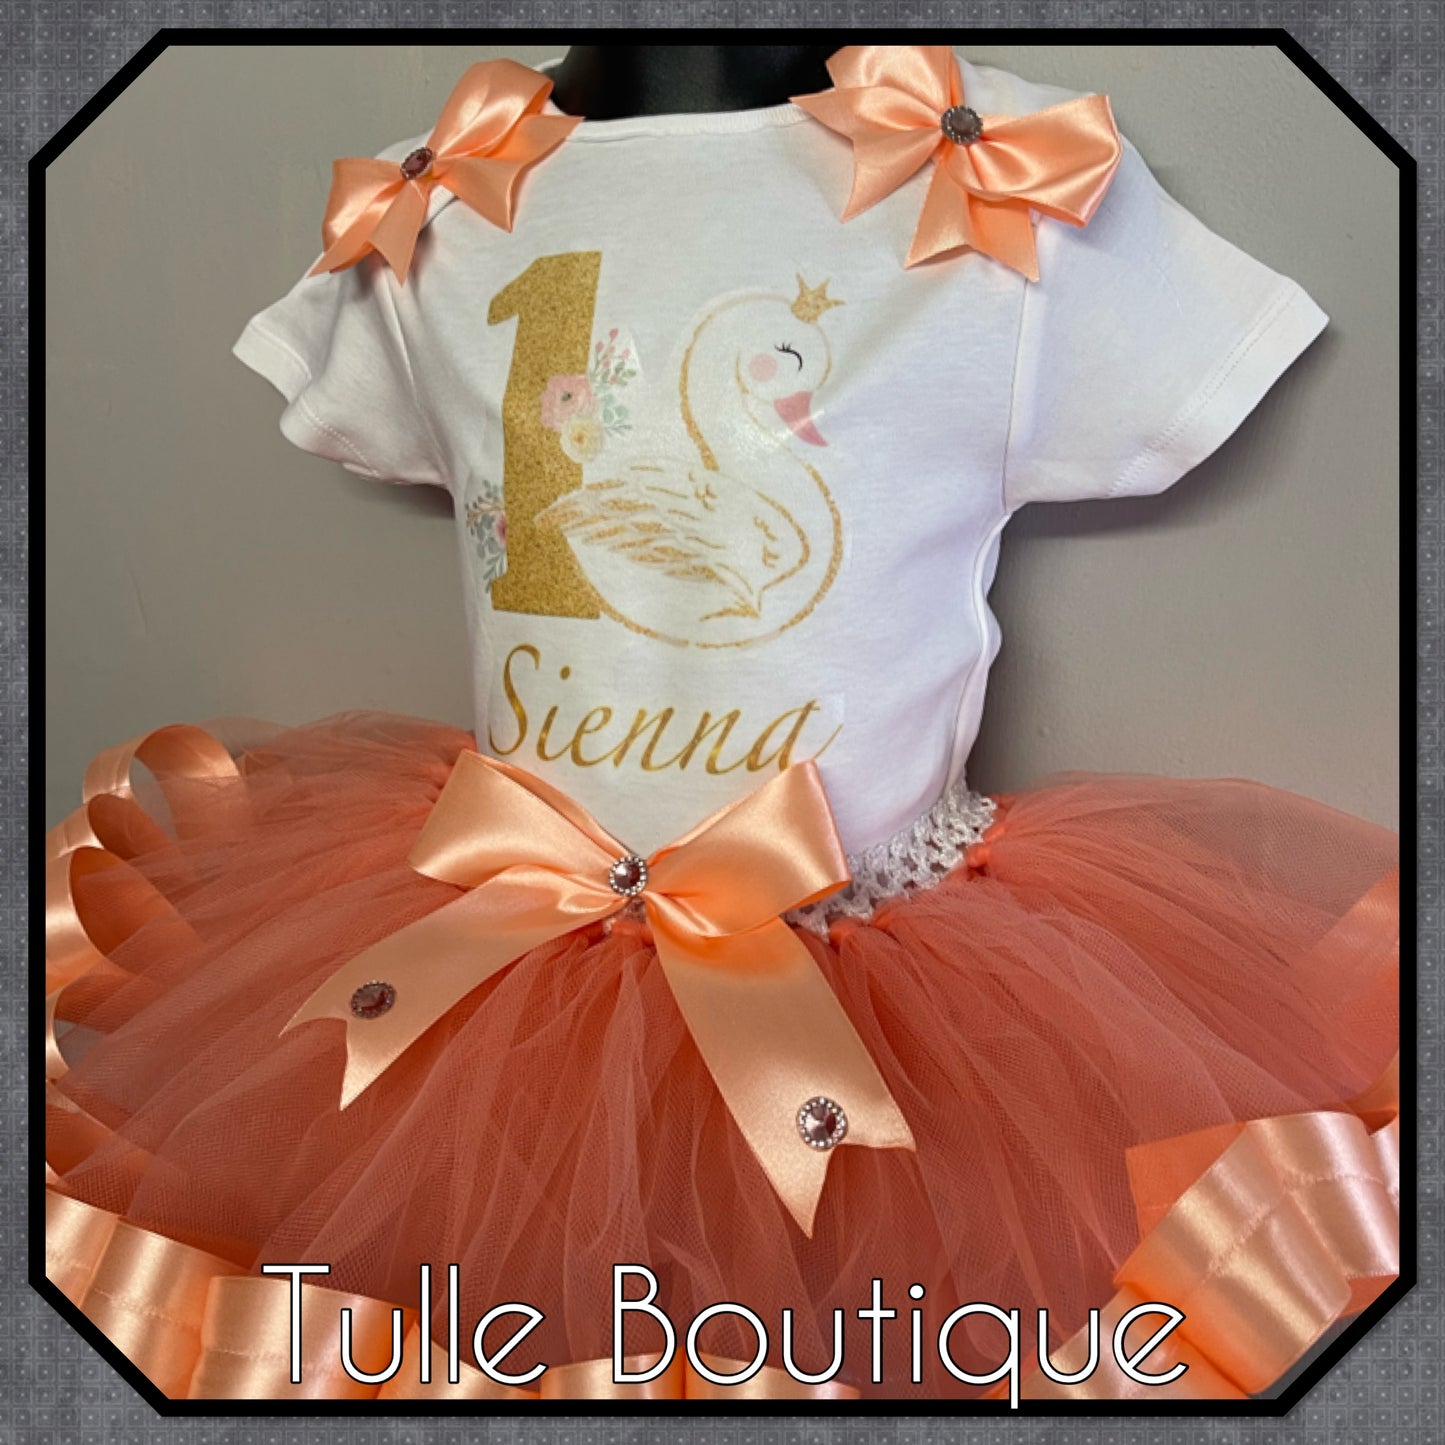 Swan princess ribbon trimmed tutu birthday party outfit